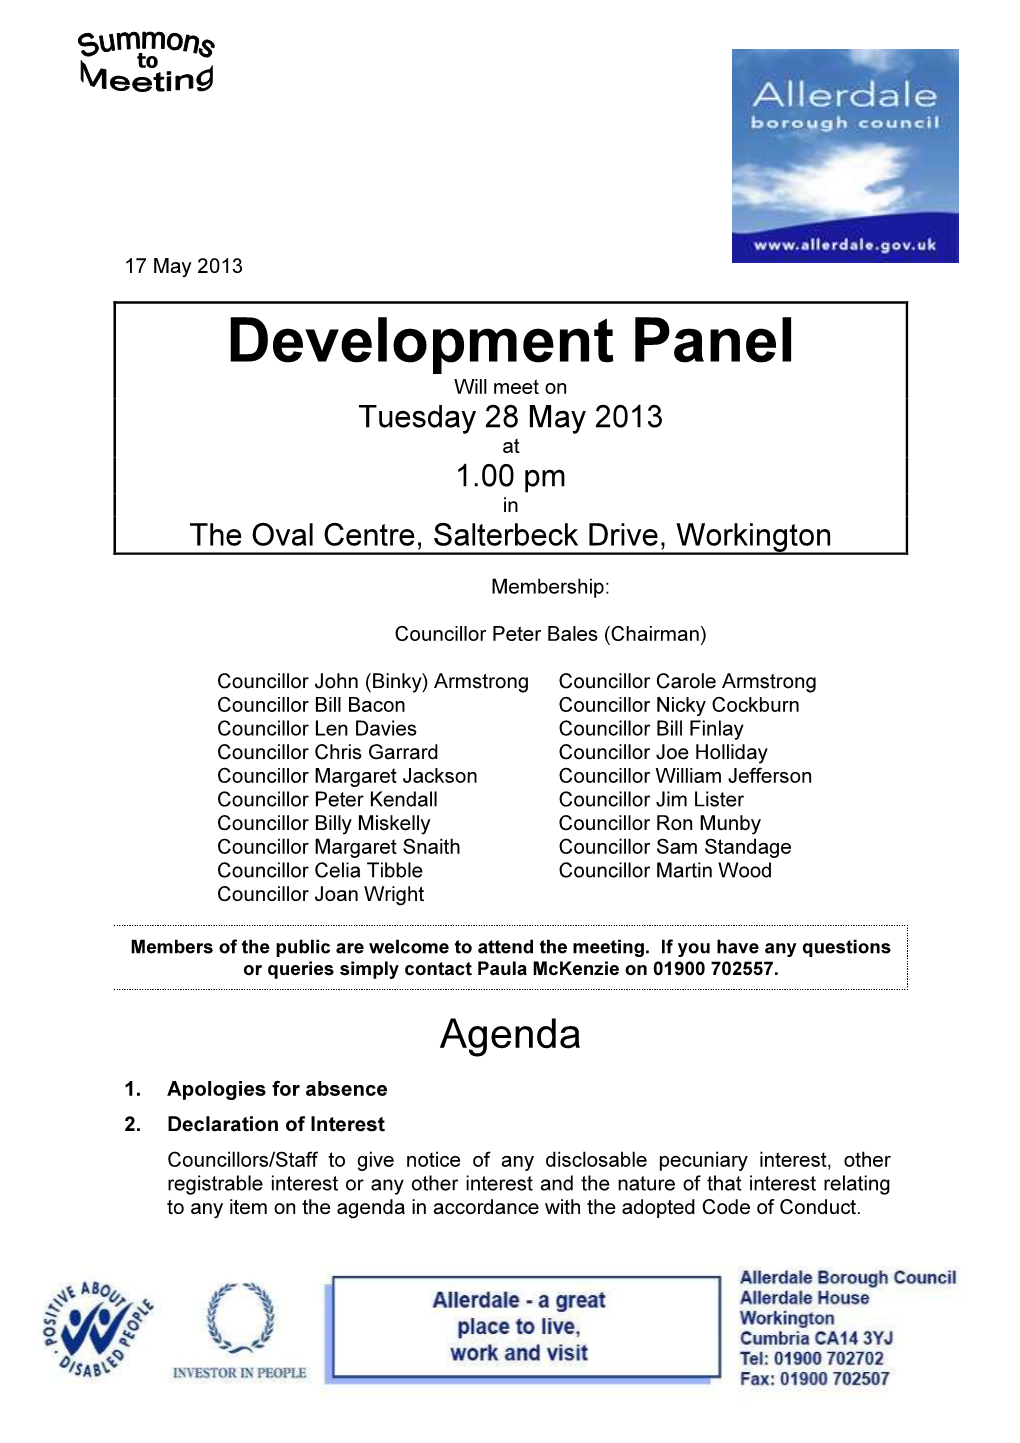 Development Panel Will Meet on Tuesday 28 May 2013 at 1.00 Pm in the Oval Centre, Salterbeck Drive, Workington